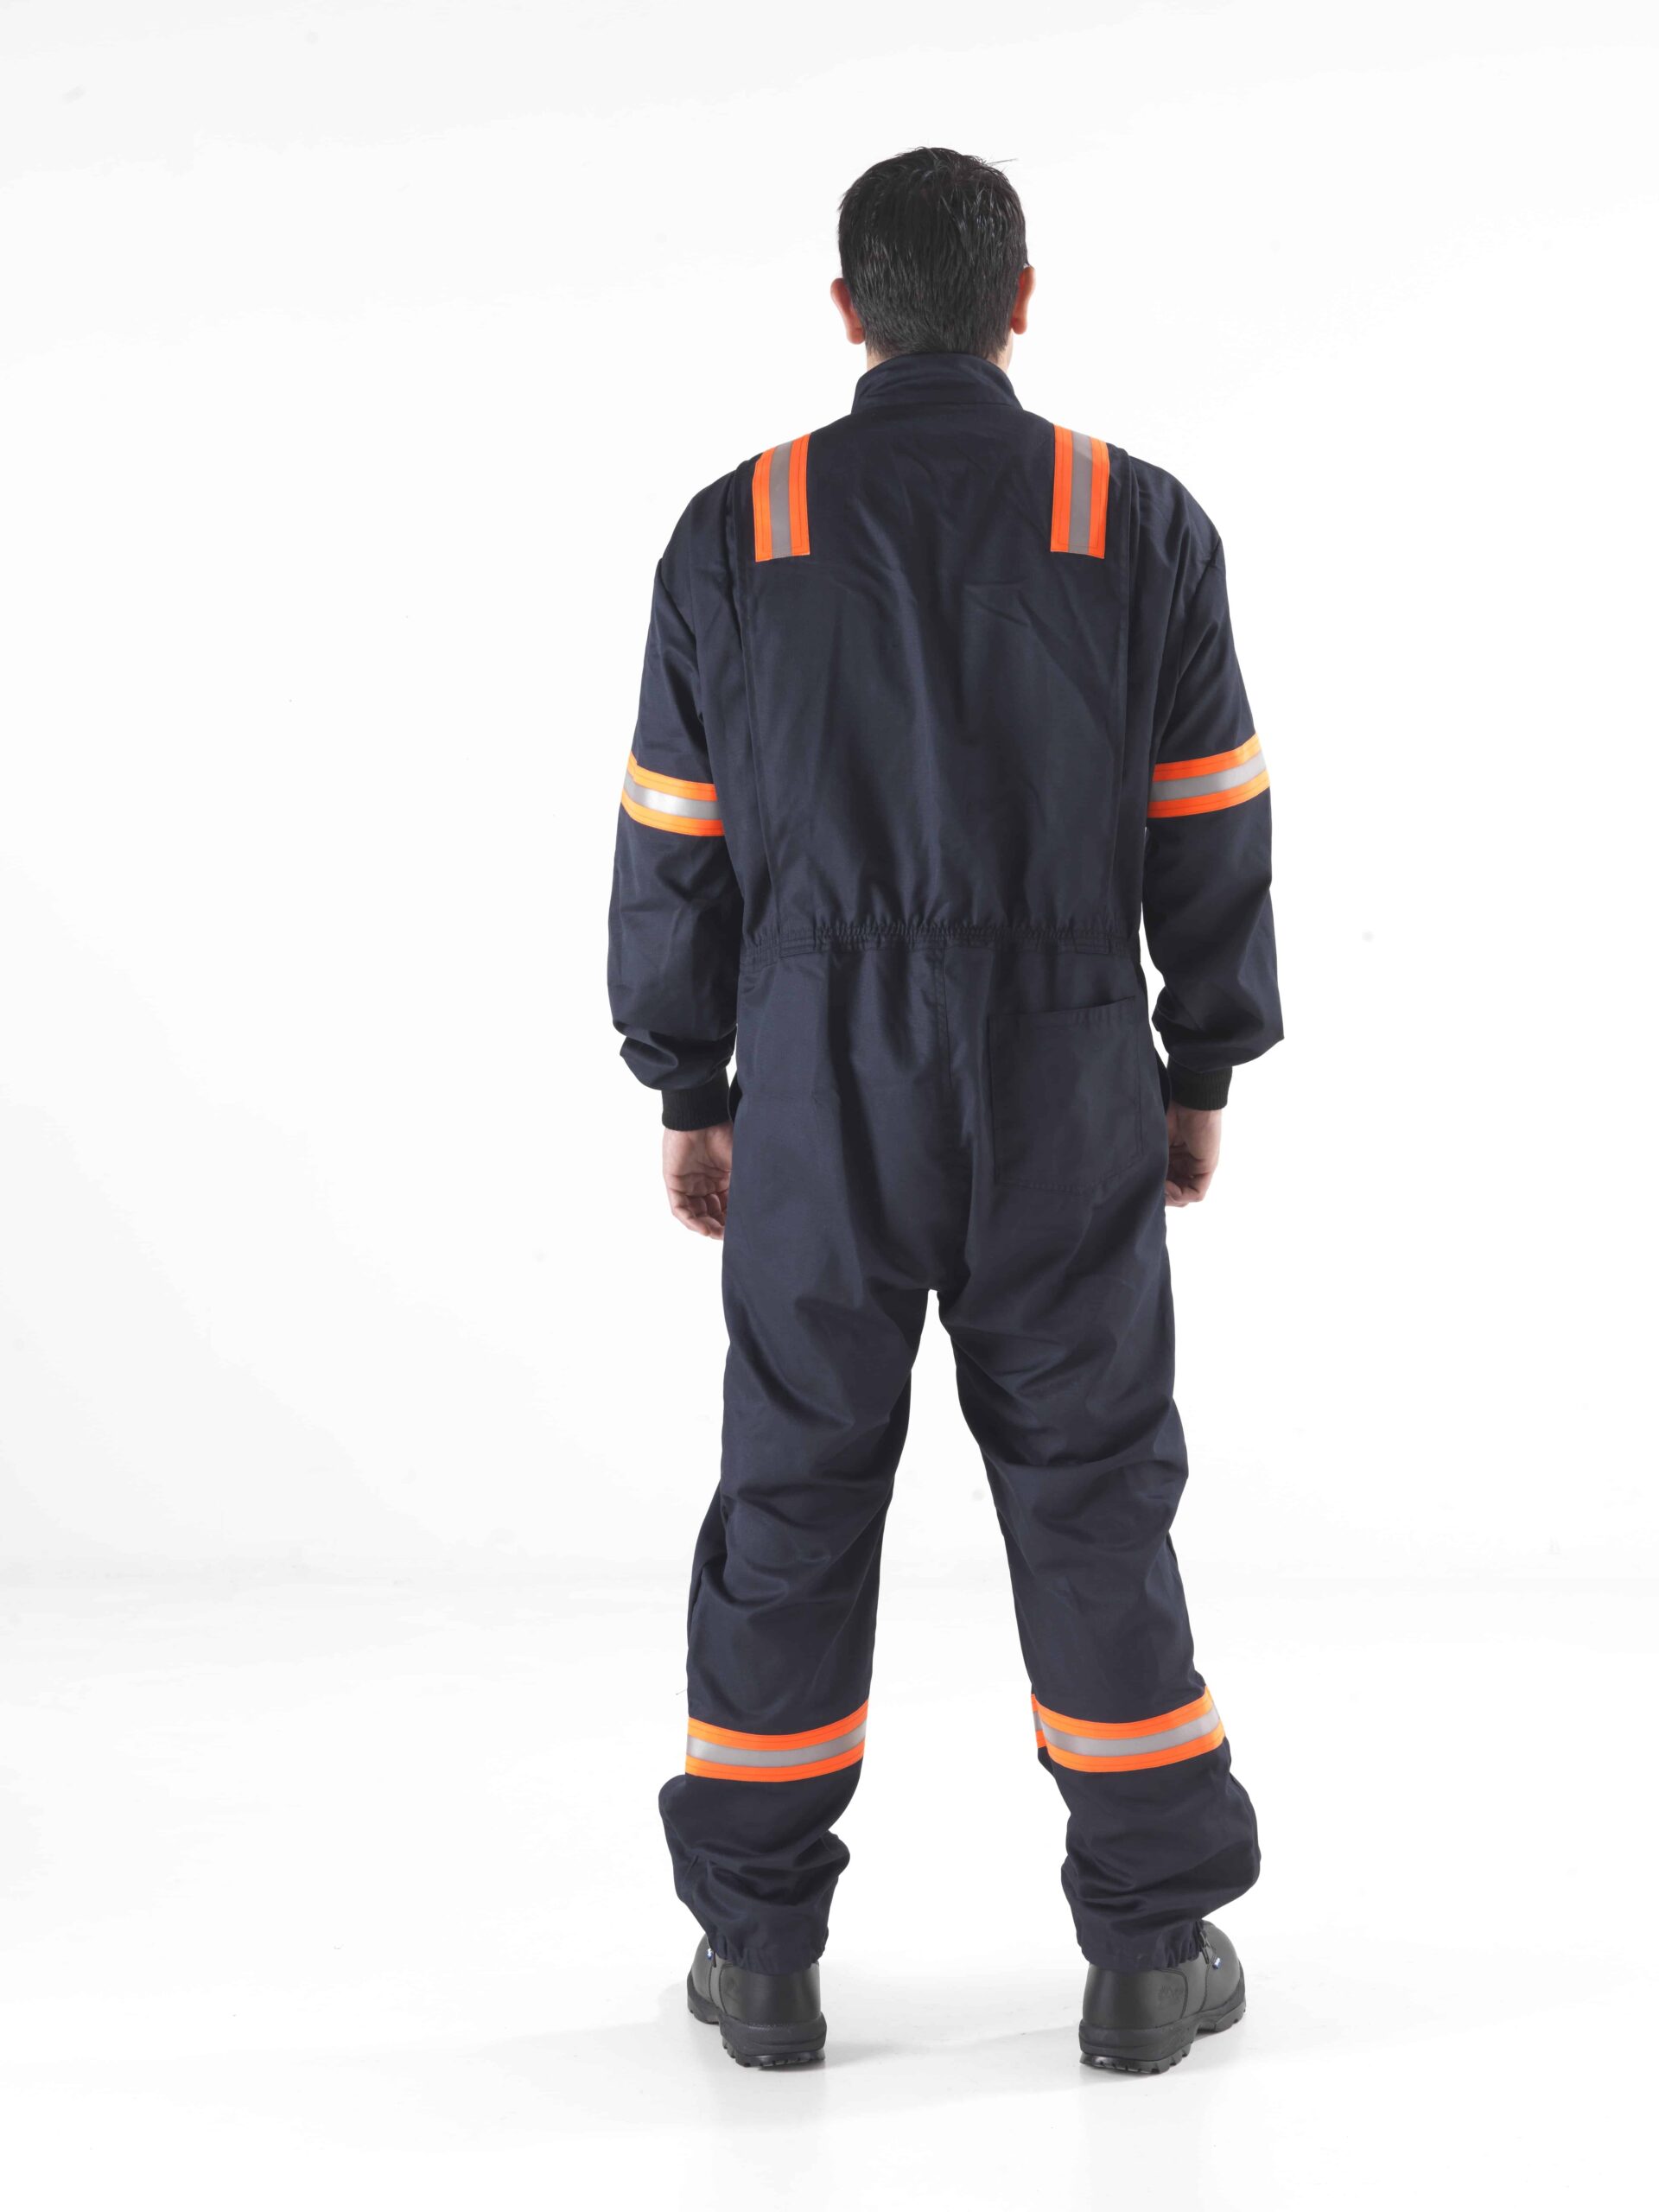 ArcBan® Nordic Deluxe Nomex Coverall back